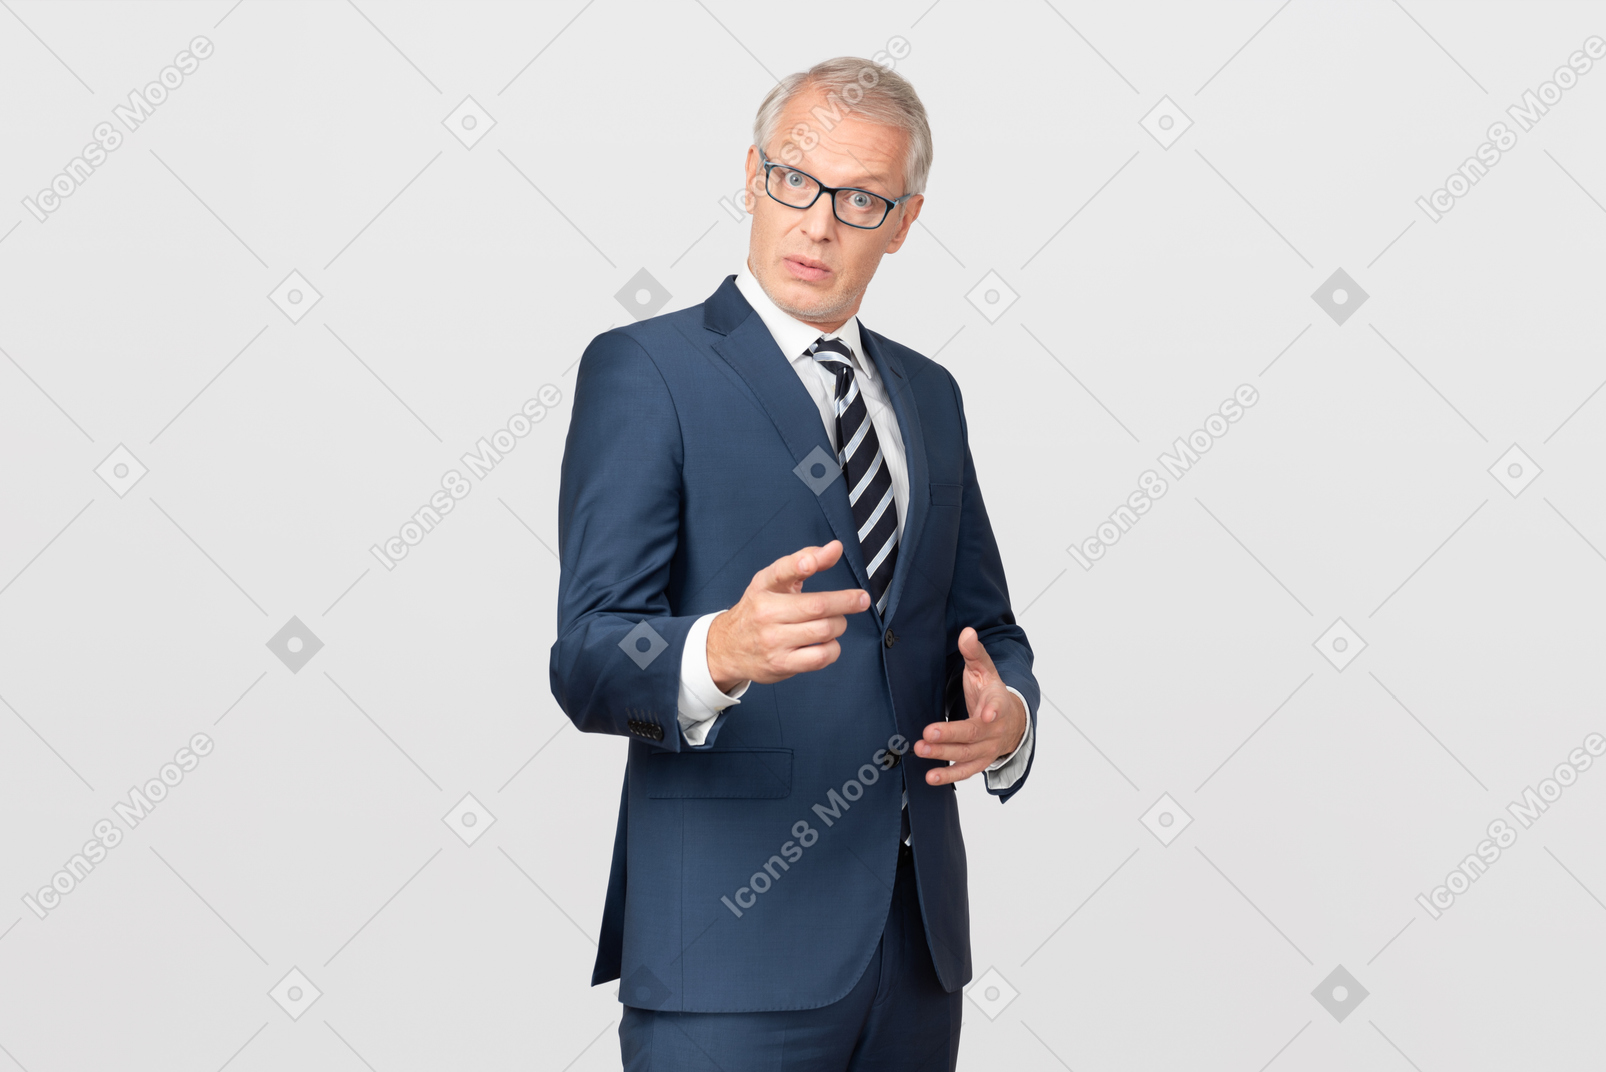 Middle aged man looking surprised with something